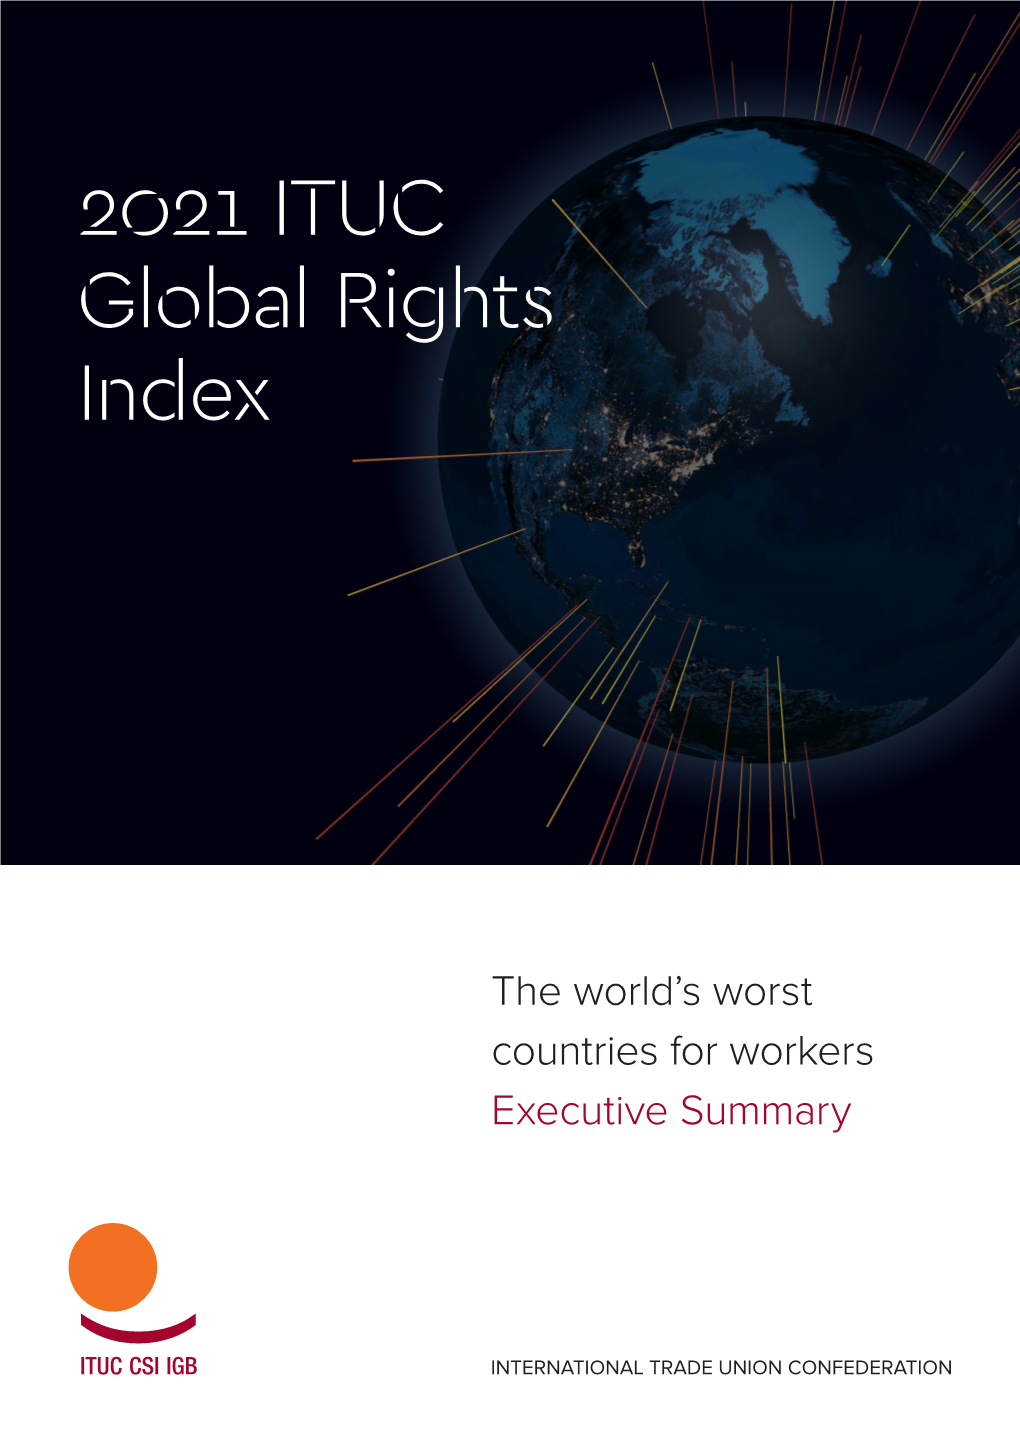 2021 ITUC Global Rights Index